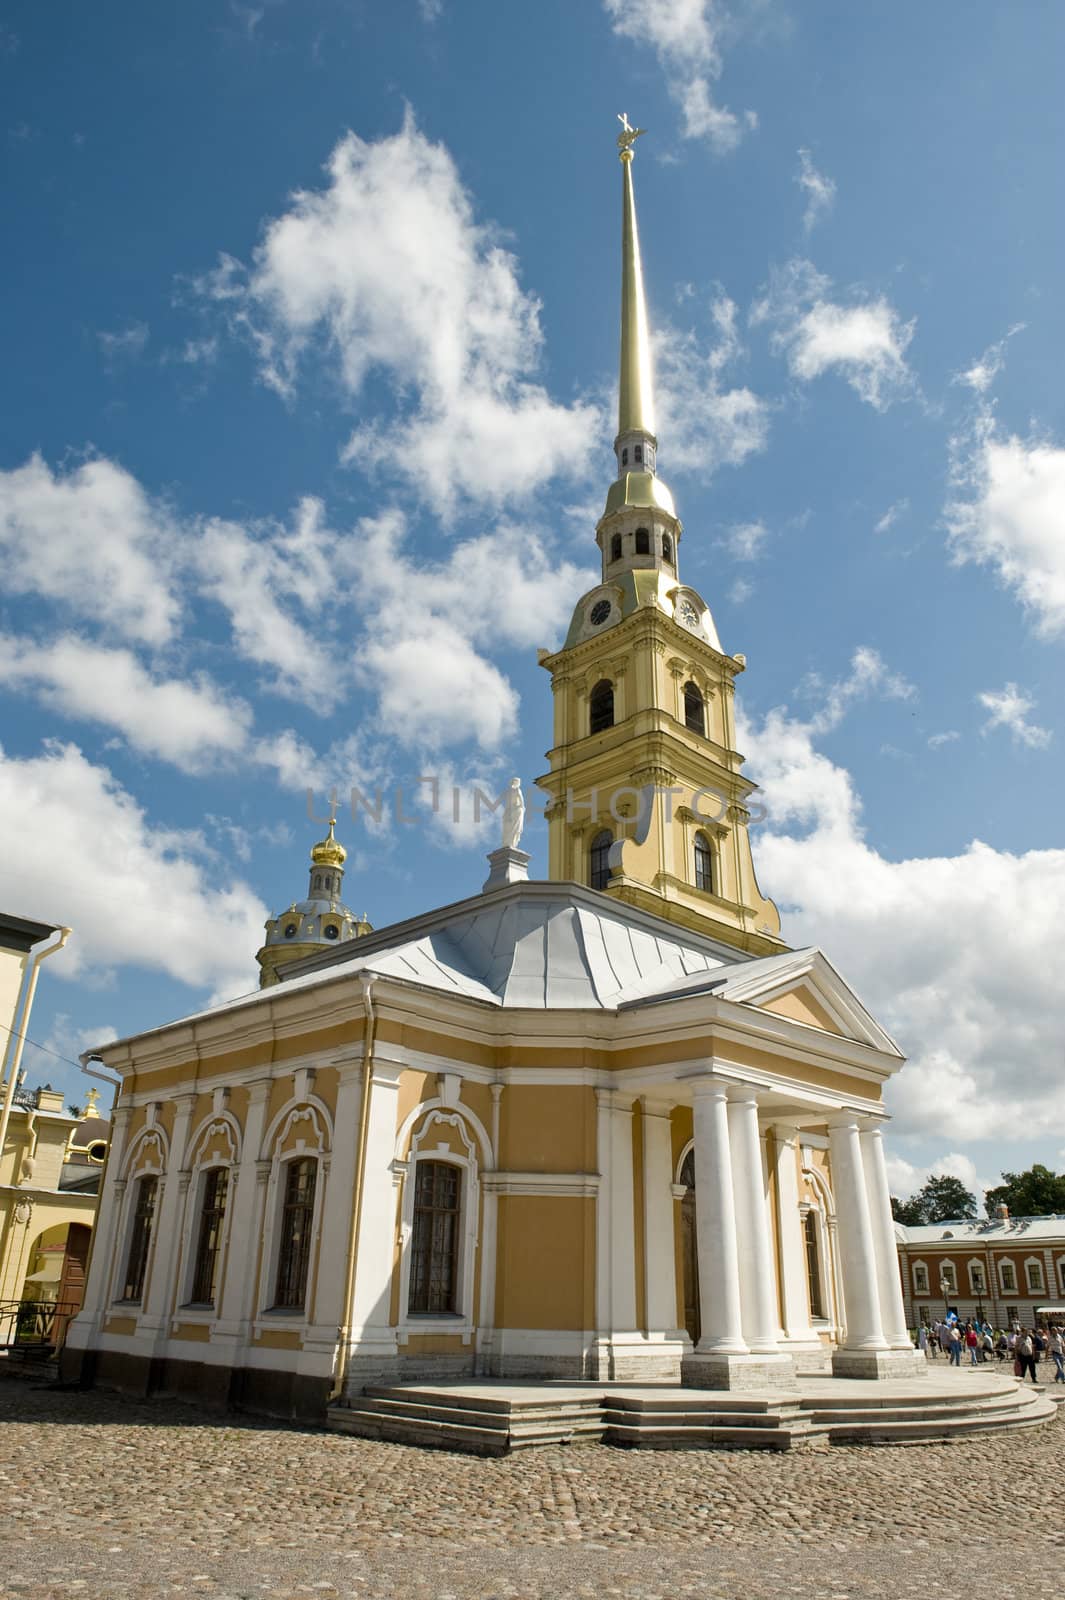 St. Peter and Pavel's cathedral in the Peter and Paul Fortress in St.-Petersburg, Russia